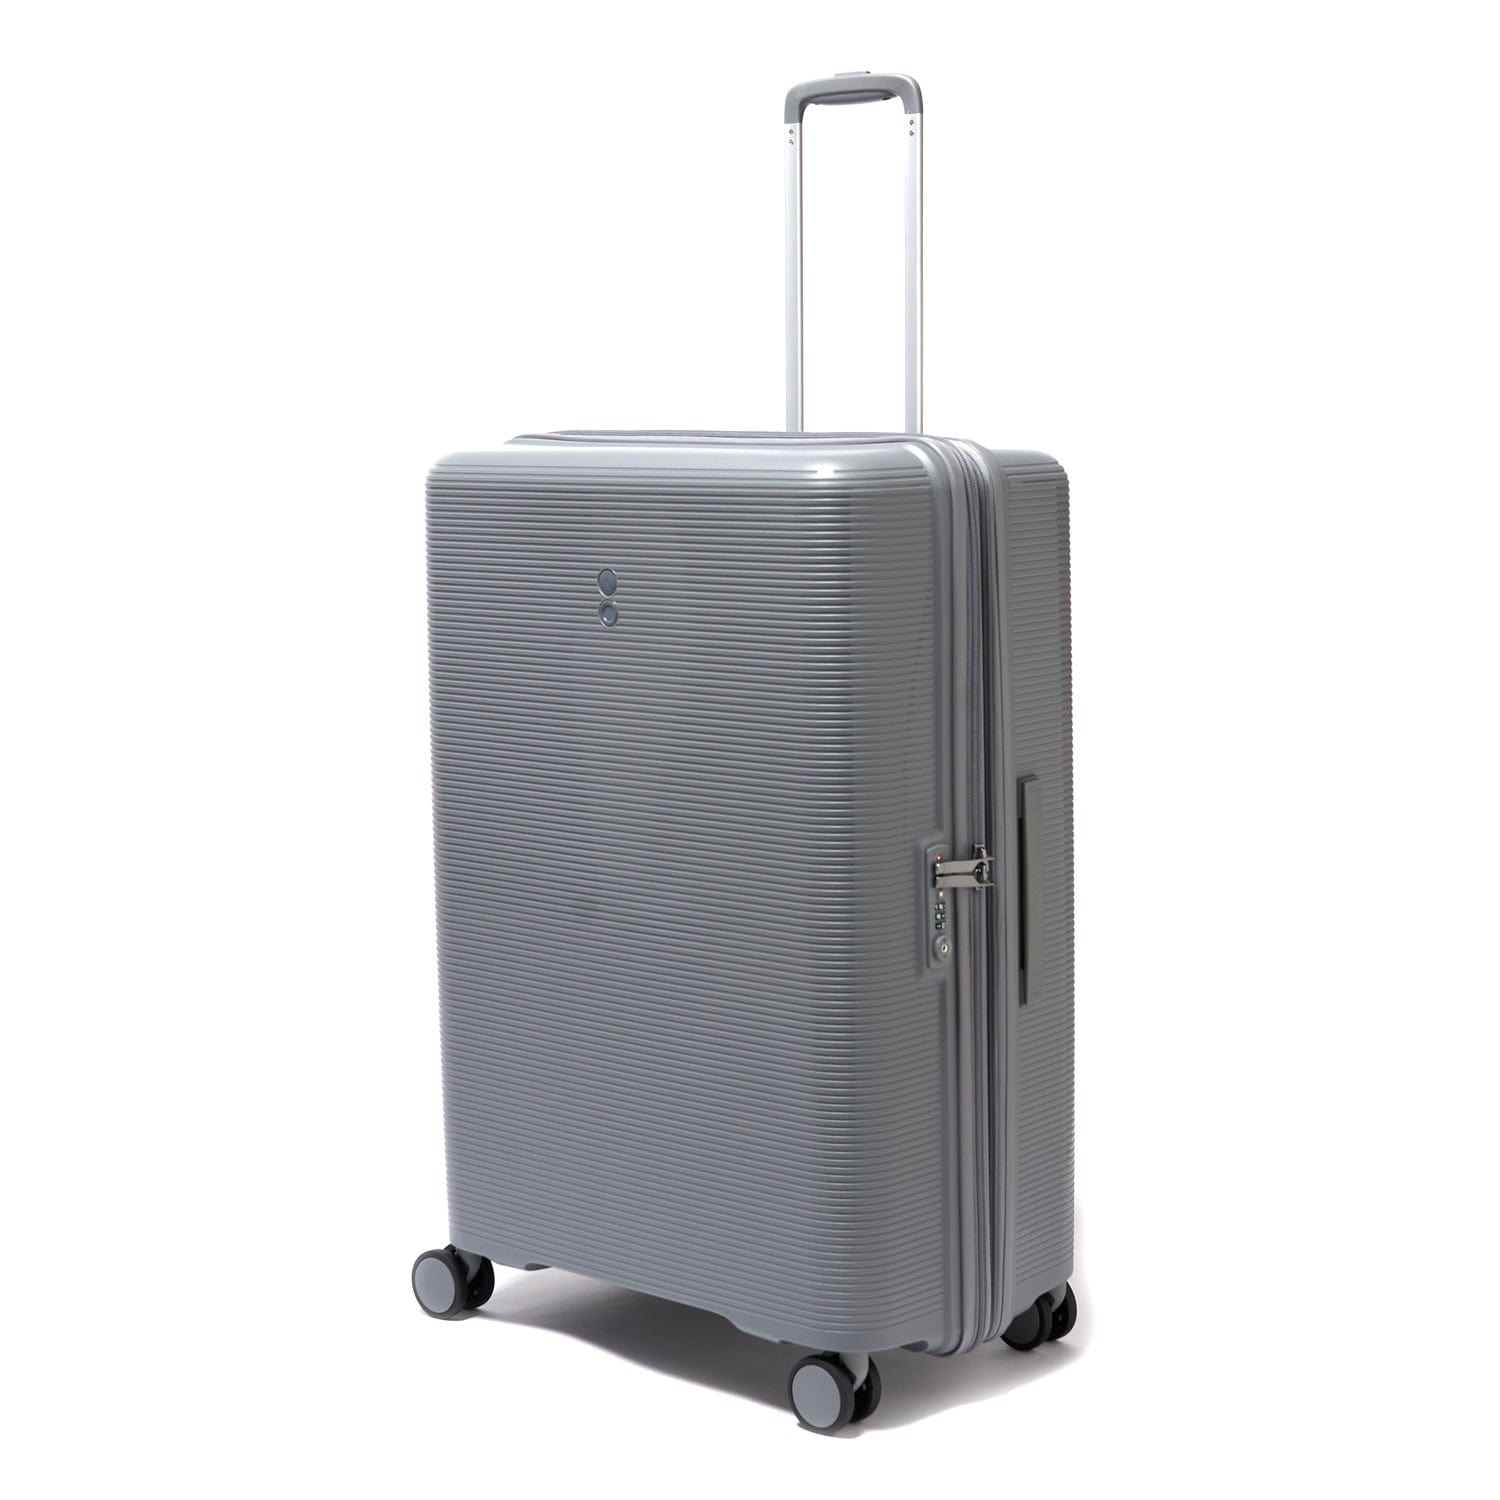 Echolac Forza 75cm Hardcase Expandable 4 Double Wheel Cabin Luggage Trolley Gray - PW005 28 Arctic Grey